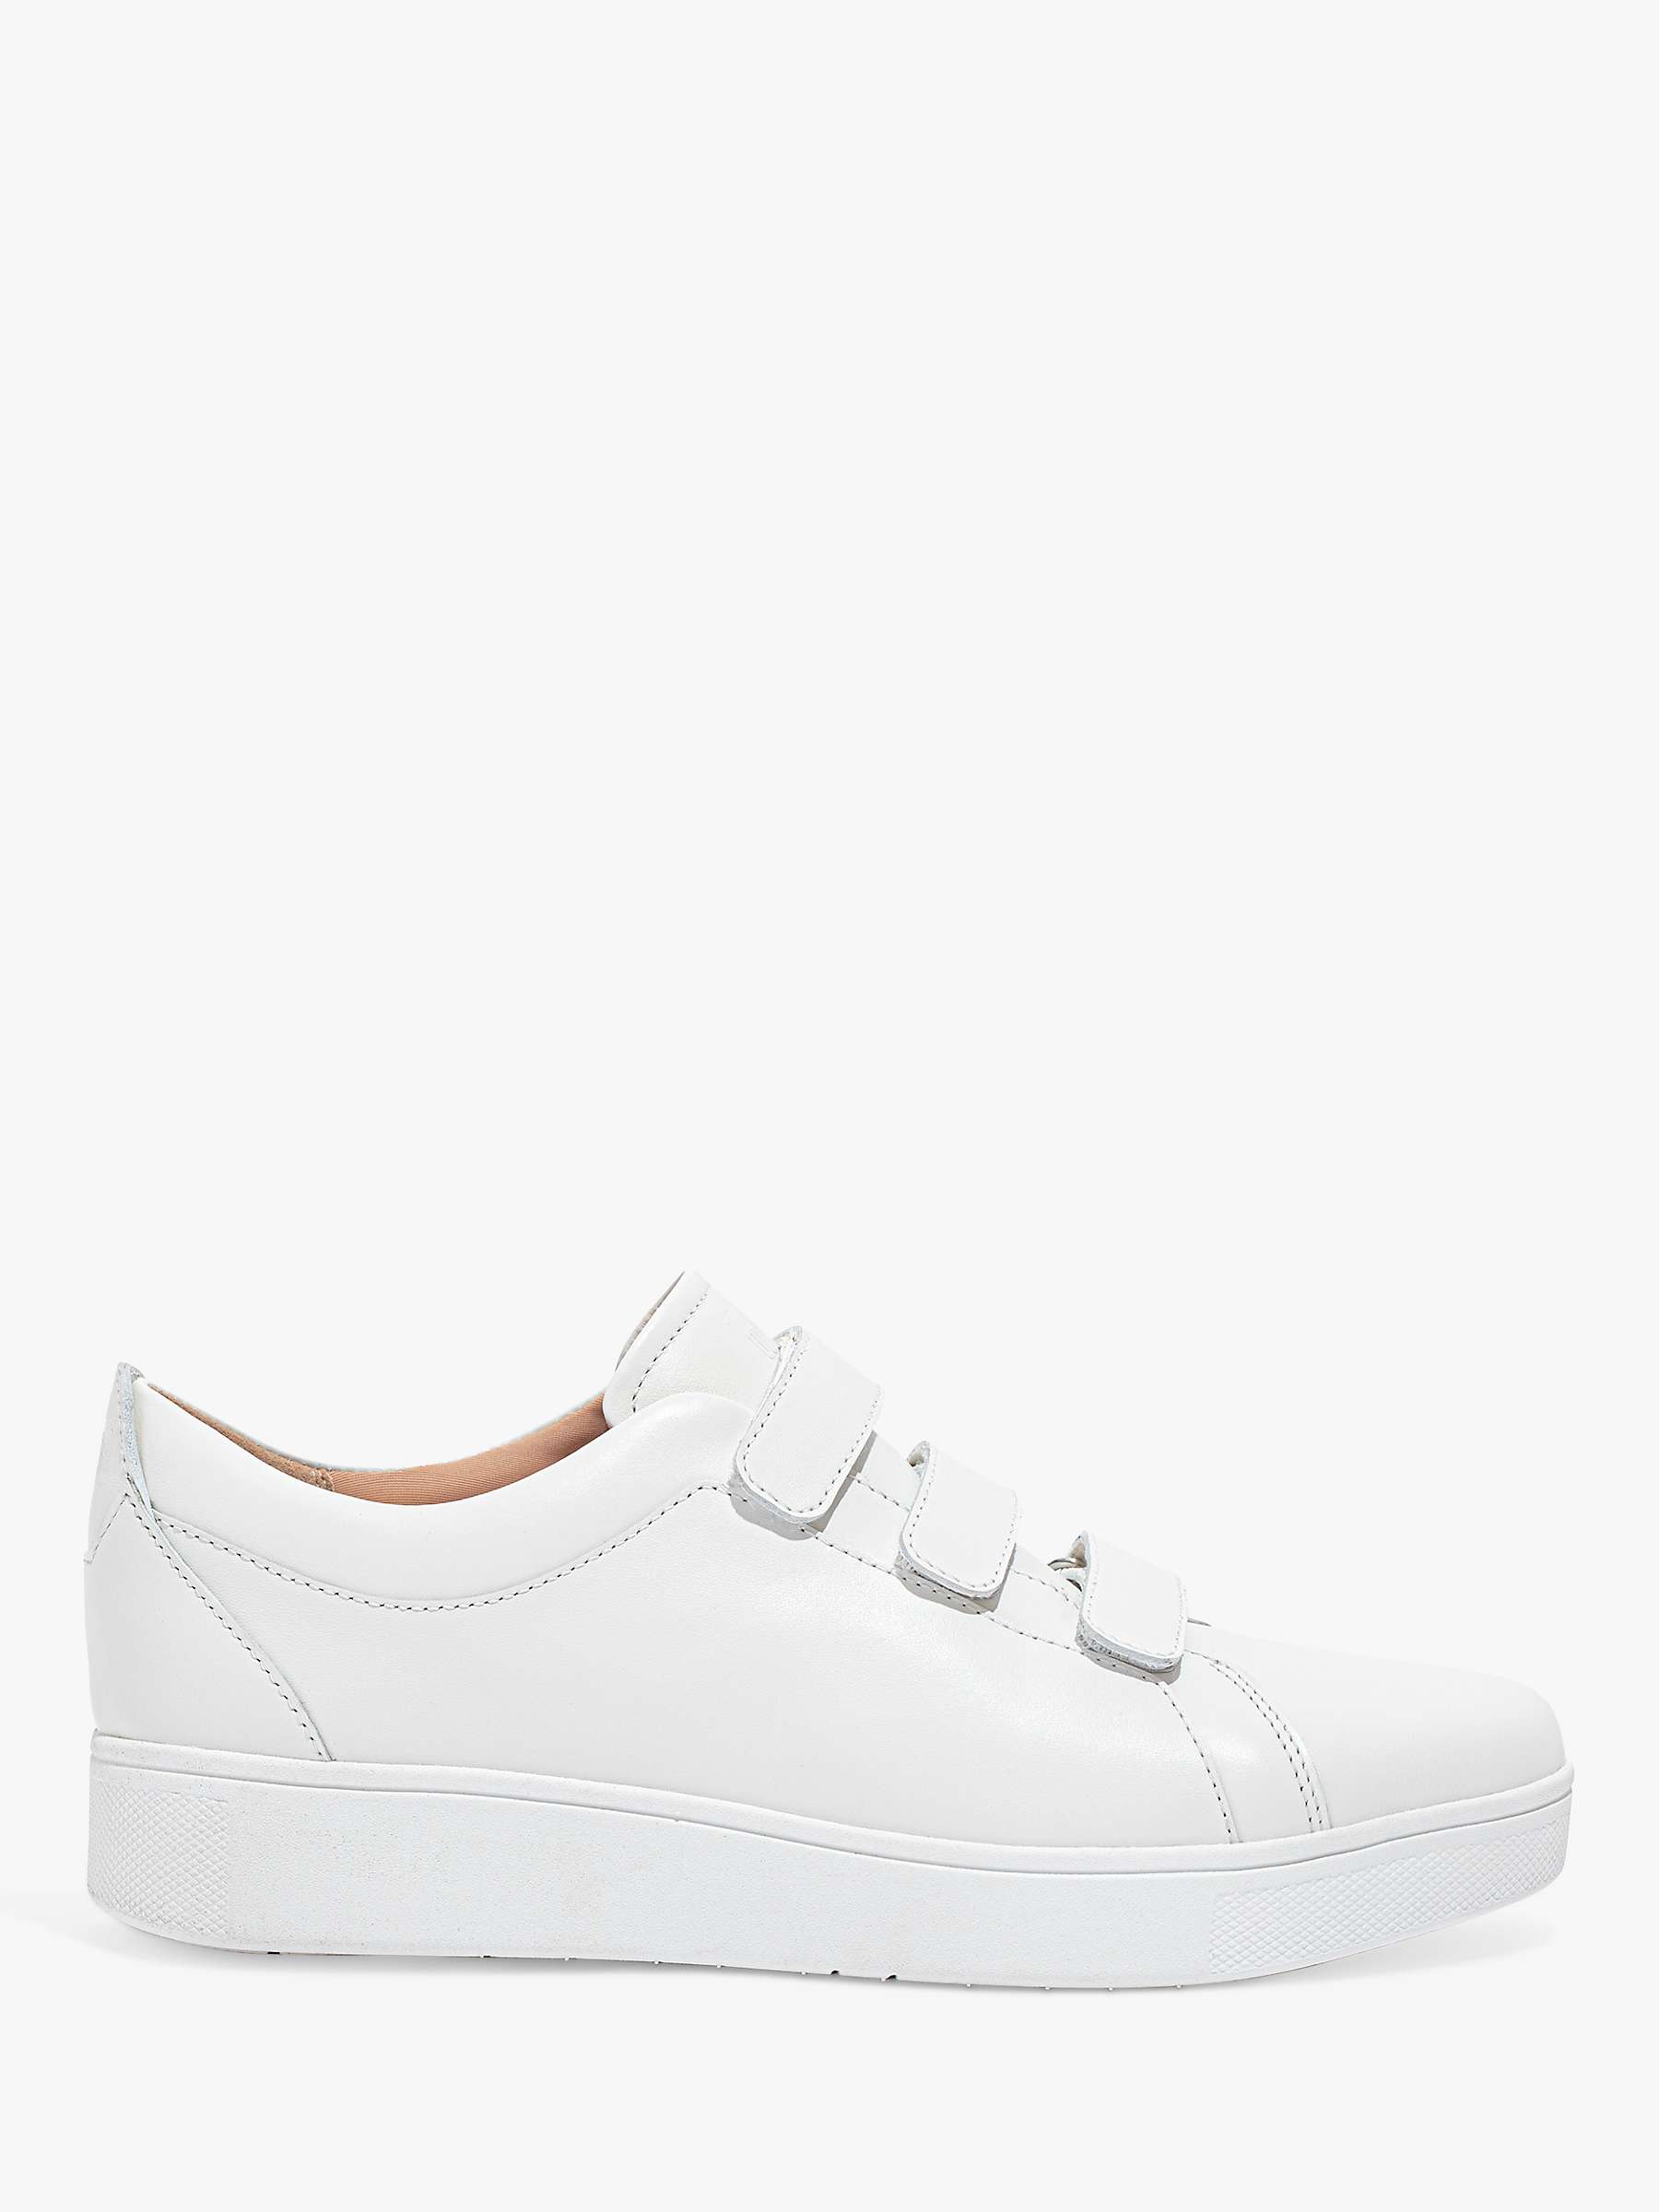 Buy FitFlop Rally Strap Leather Trainers Online at johnlewis.com